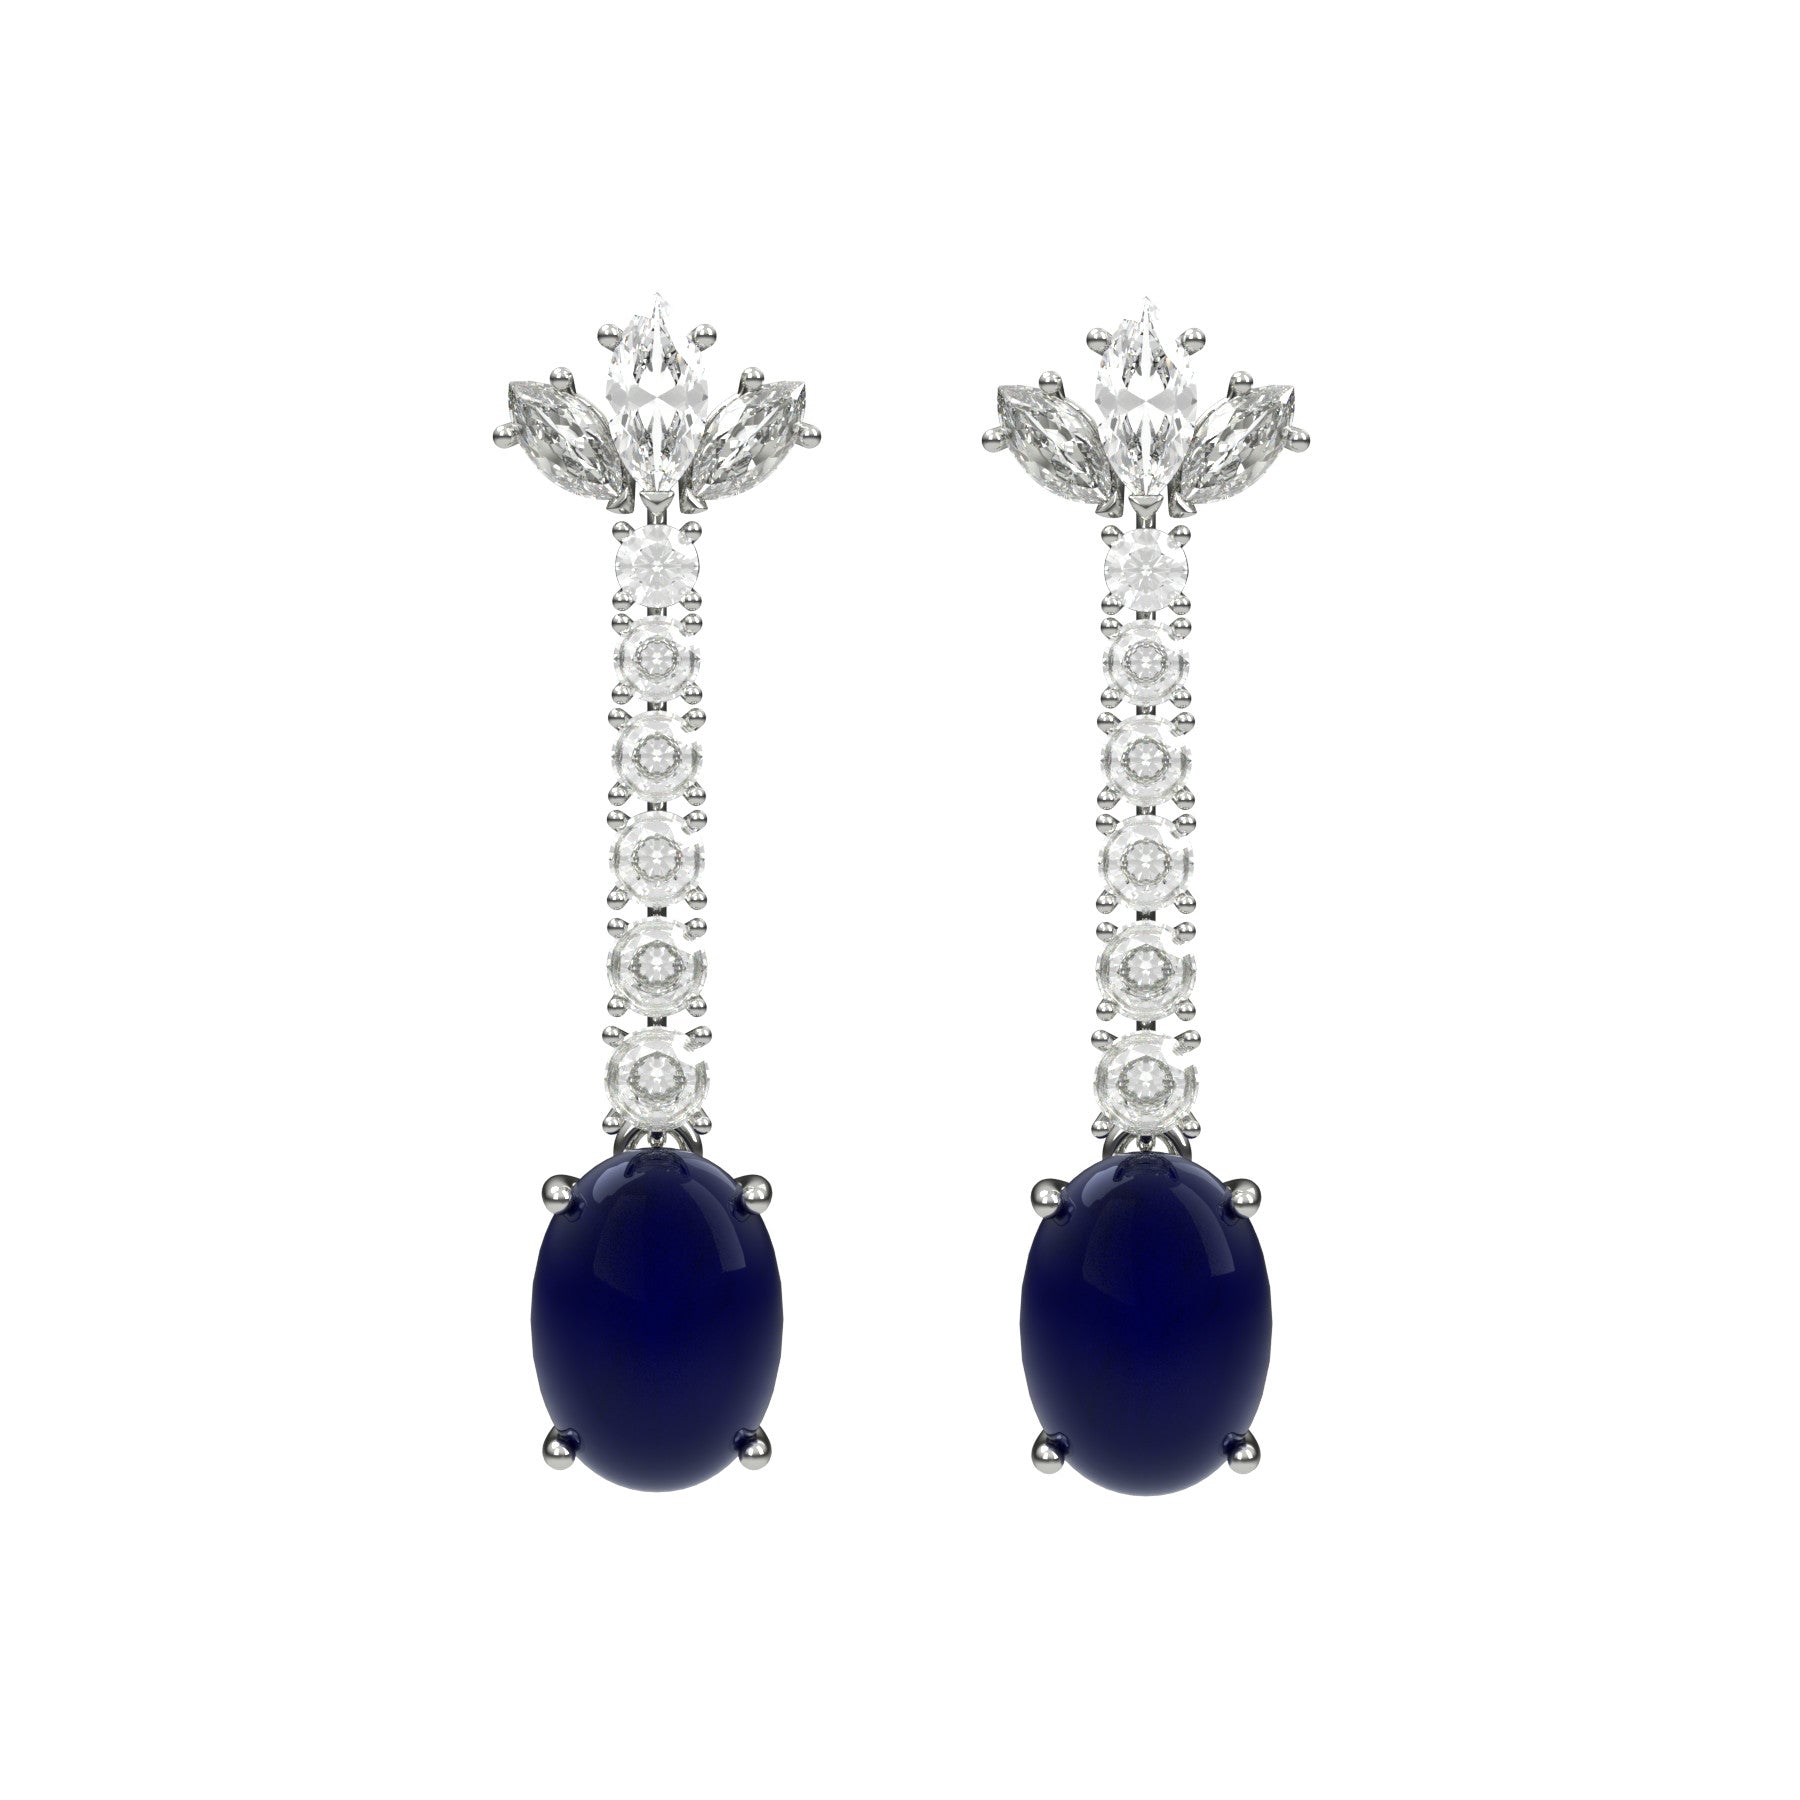 pendant earring, natural cabochon sapphires, natural diamonds 18 K white gold, weight about 3,2 g (0,11 oz), length 30 mm